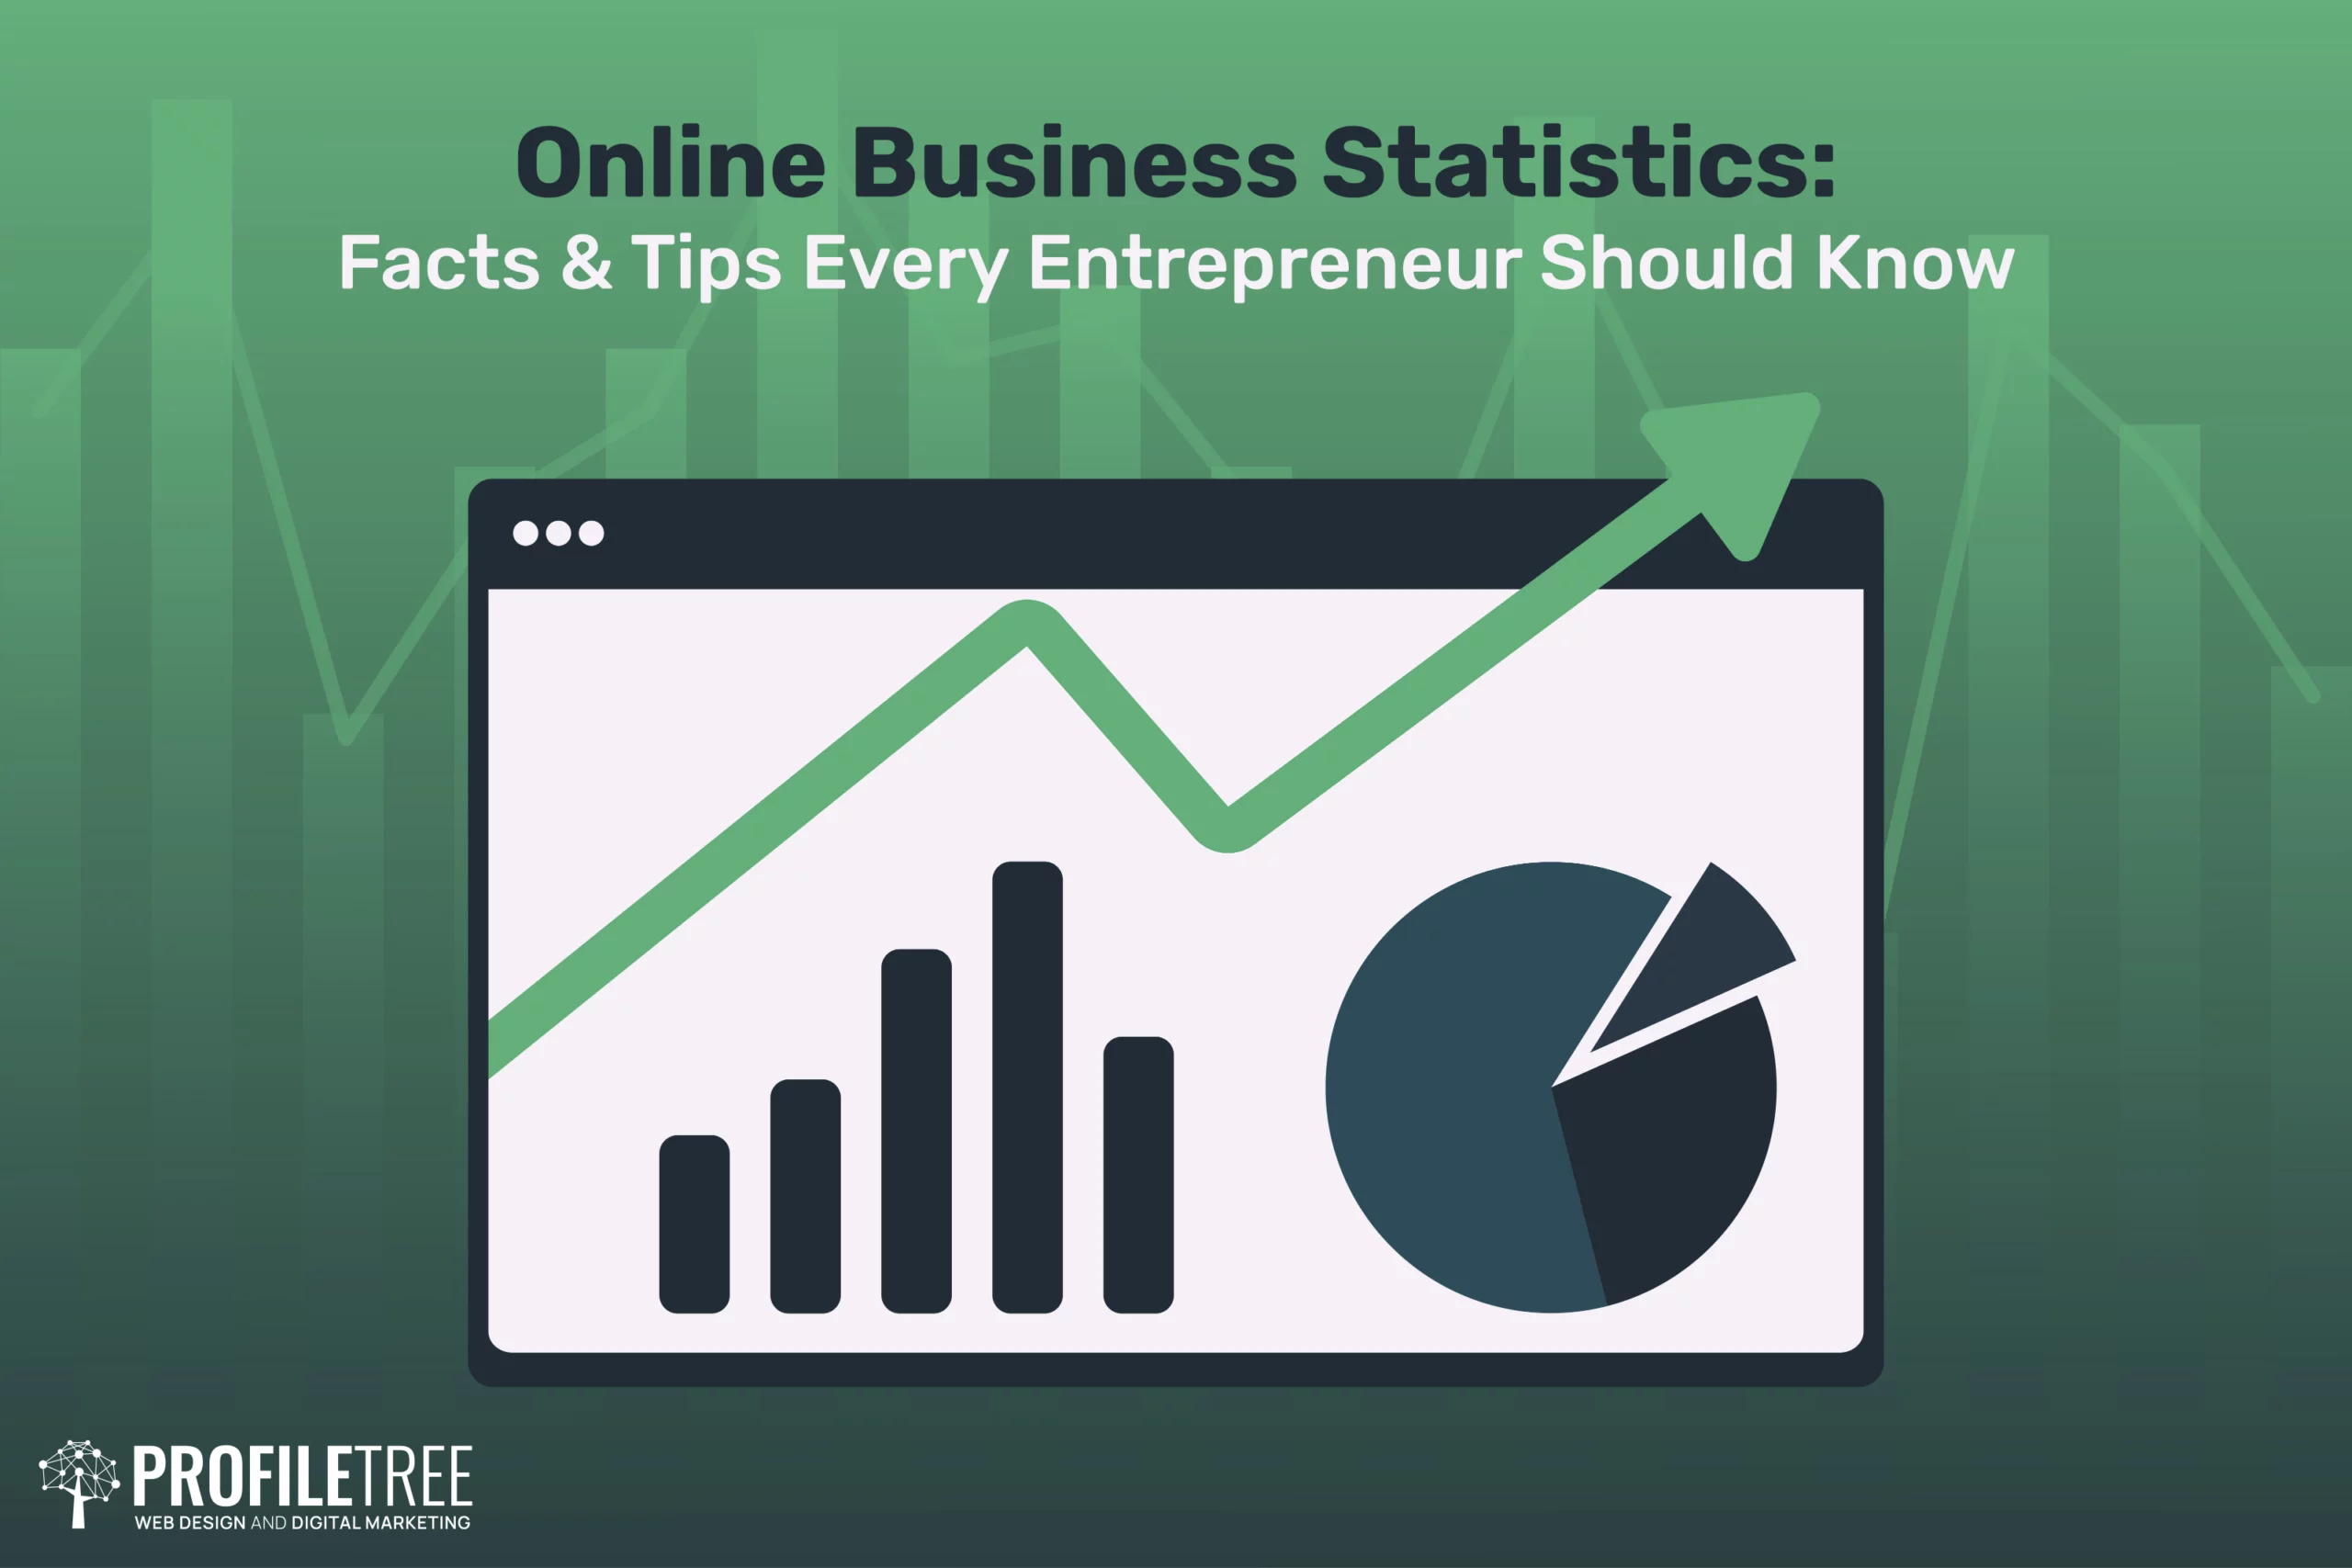 Online Business Statistics Facts & Tips Every Entrepreneur Should Know